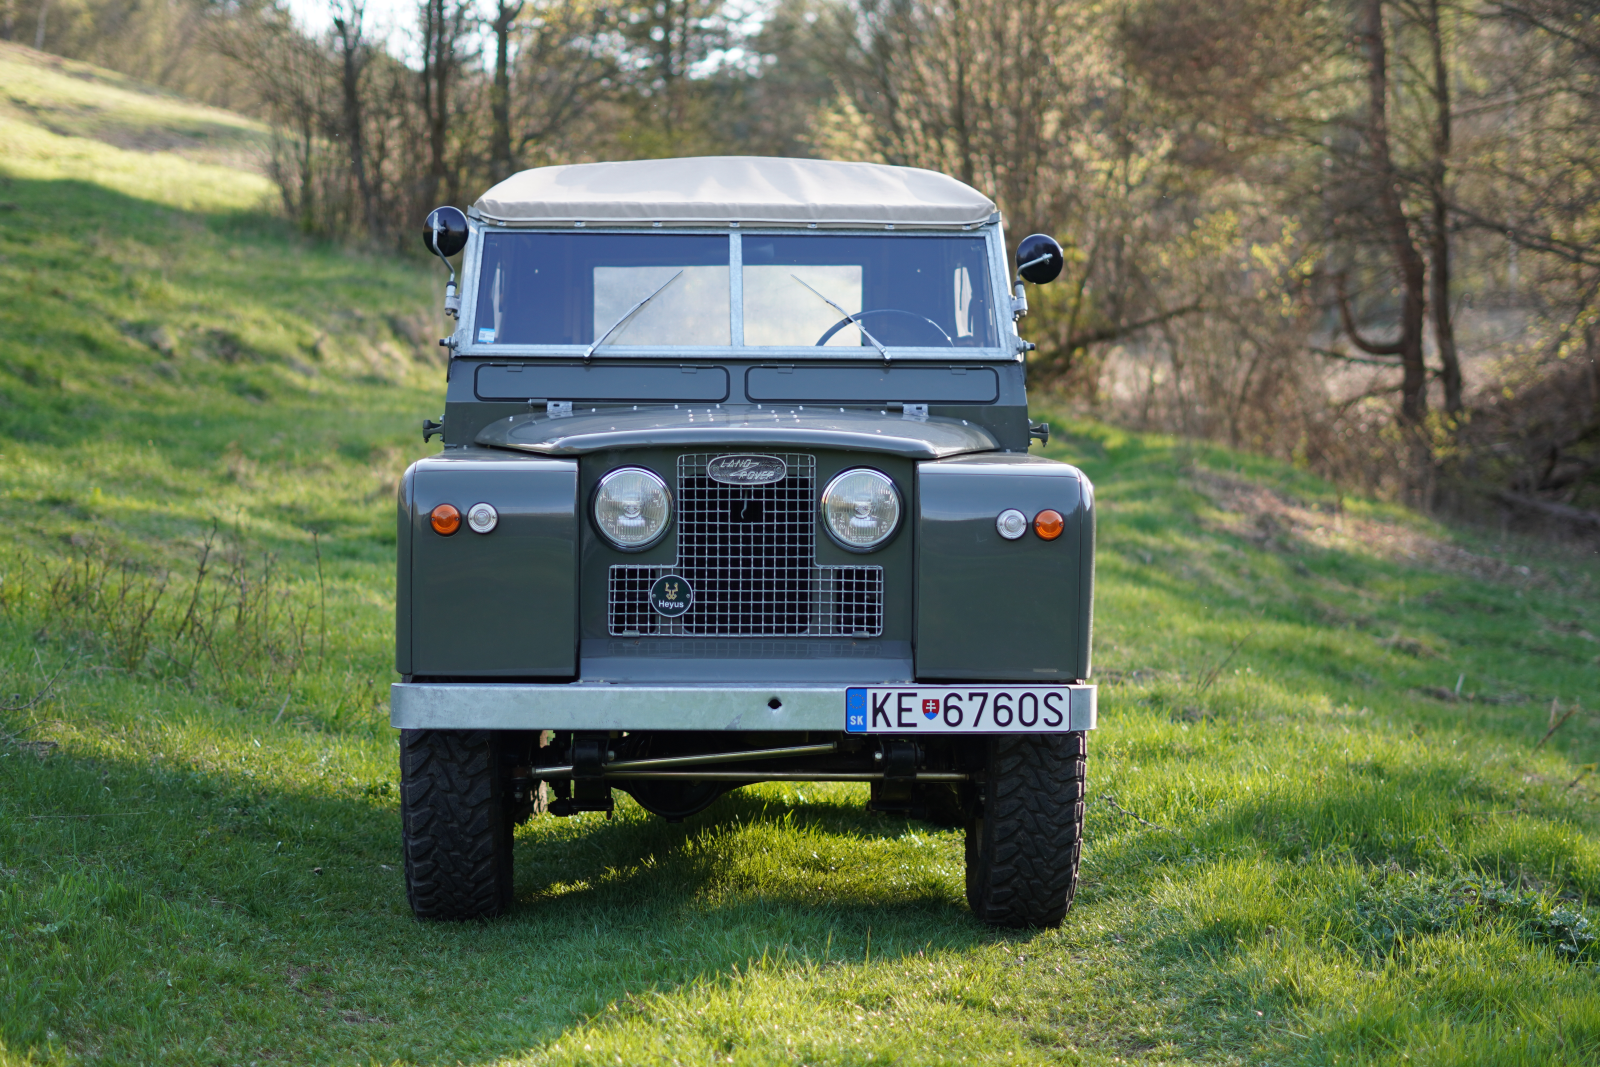 Land Rover Series 2 (1968)